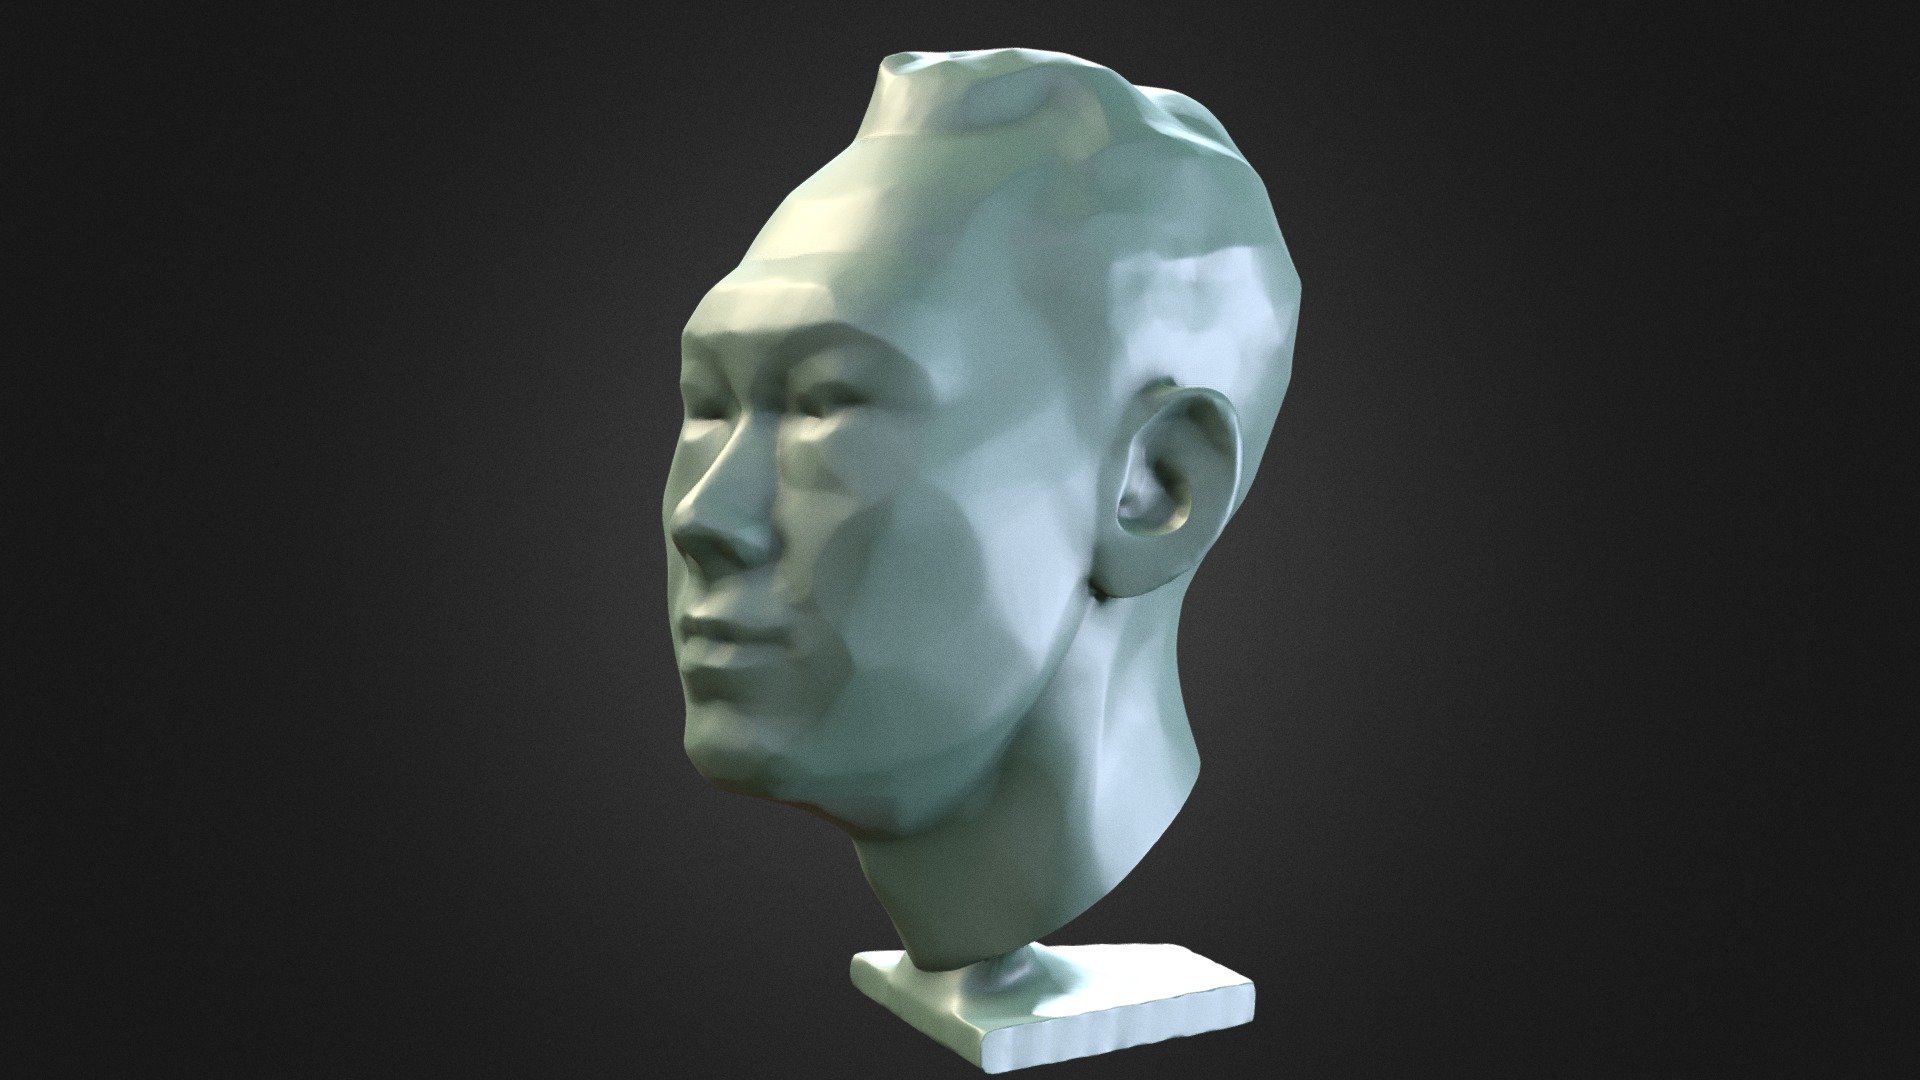 This model has been inspired by Lee, a highly respected and dedicated person committed to bringing the country and people to a better life.

This model is sufficiently detailed and prepared for 3D printing 3d model